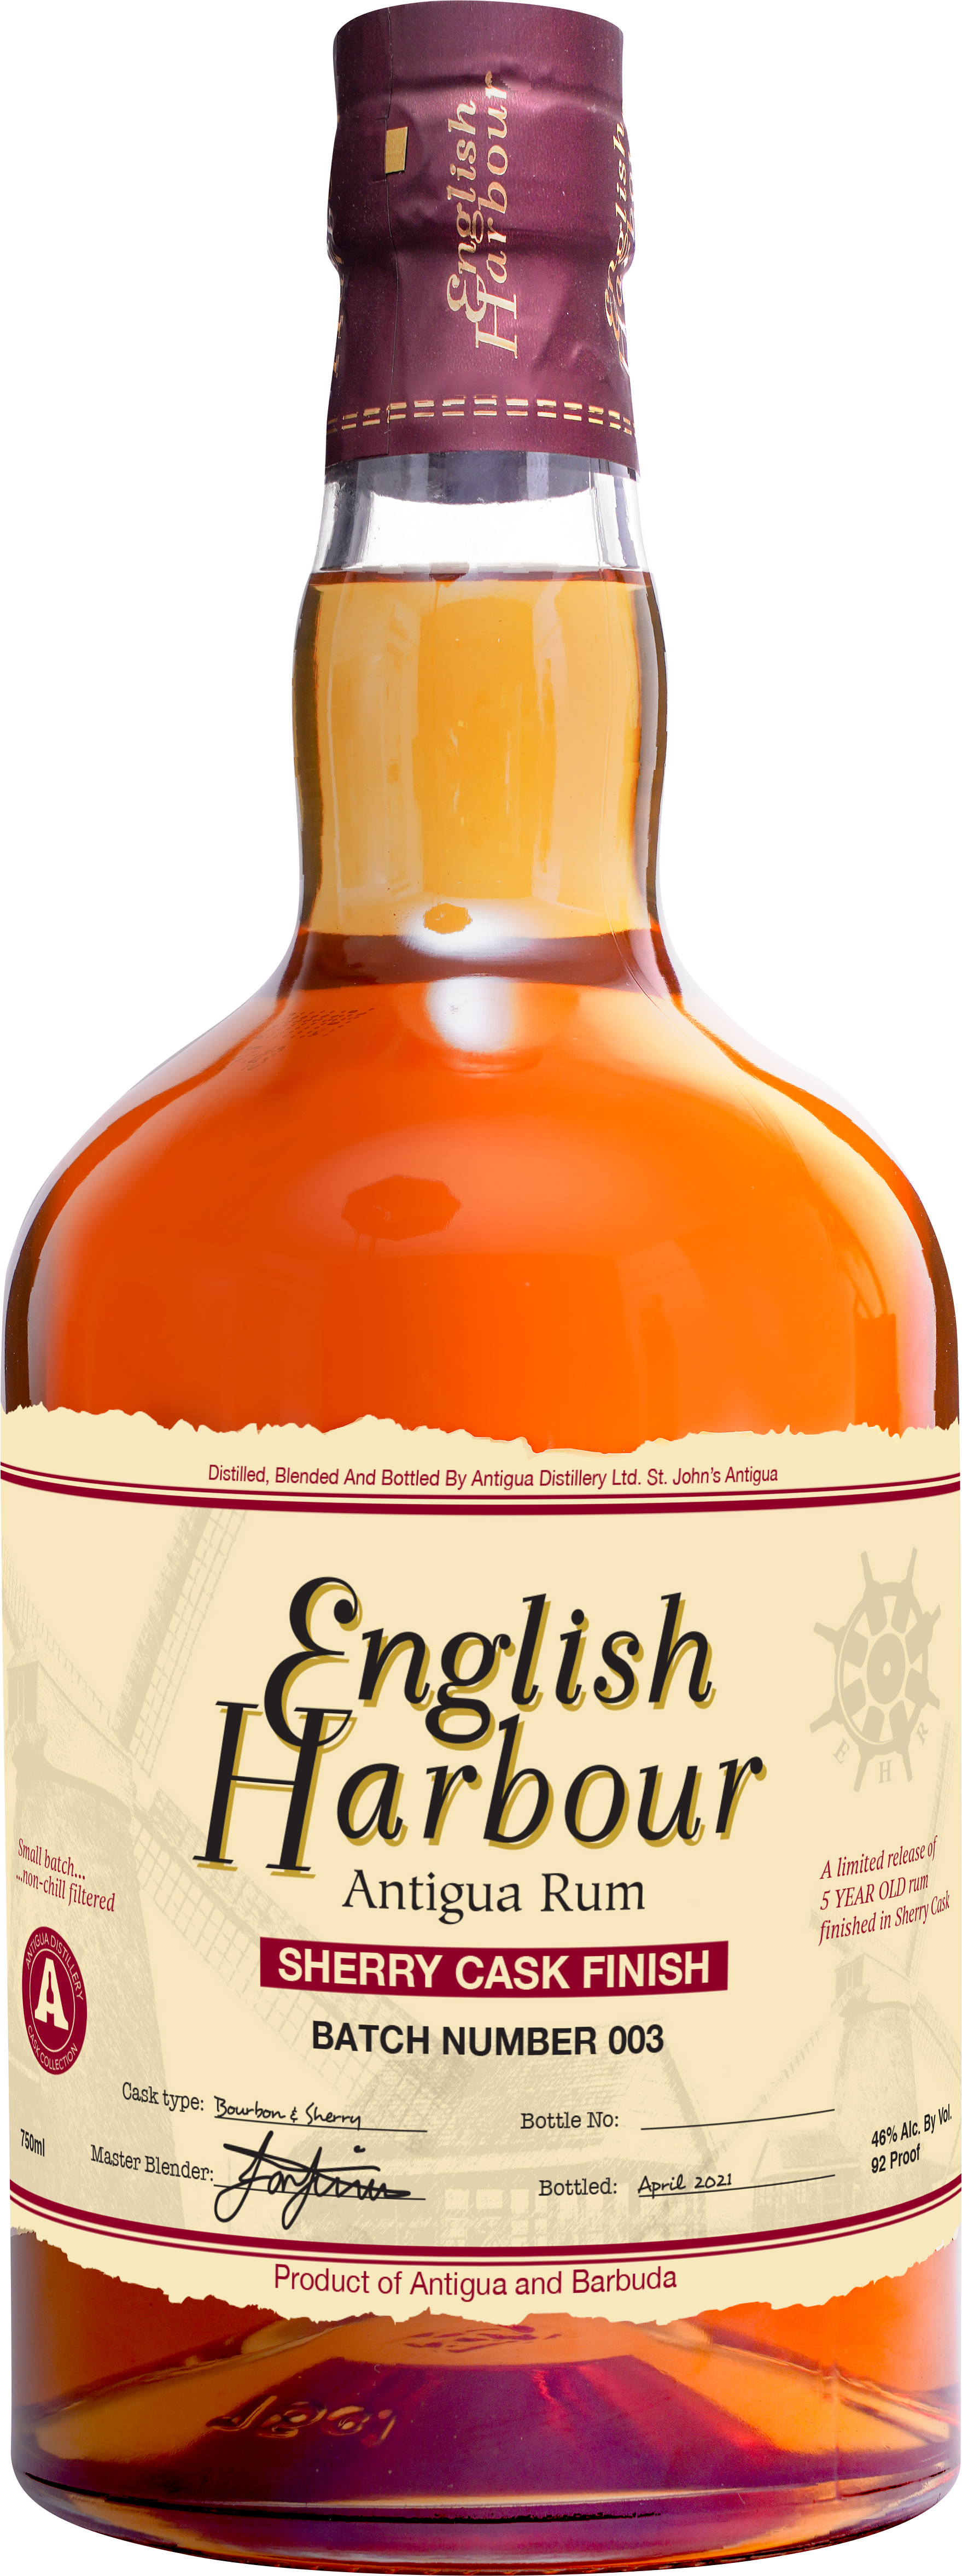 English Harbour Sherry Cask Finish Rum 46% 0,7l